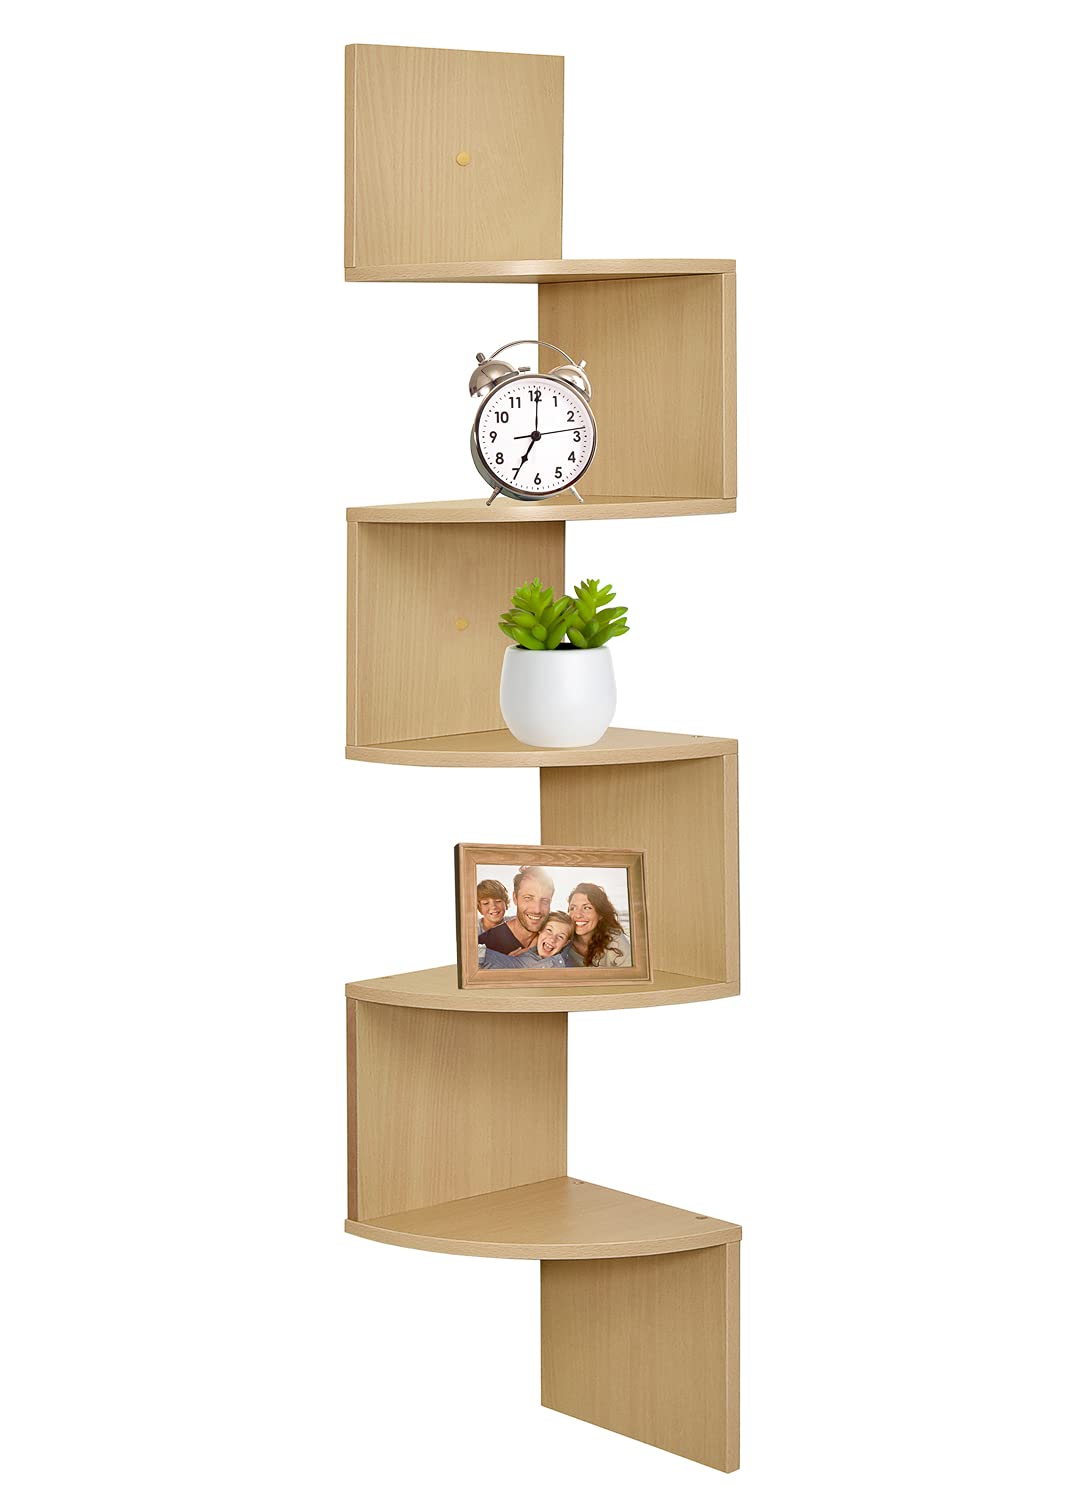 Corner Shelf, Greenco 5 Tier Floating Shelves for Wall, Easy-to-Assemble Wall Mount Corner Shelves for Bedrooms and Living Rooms, Natural Finish